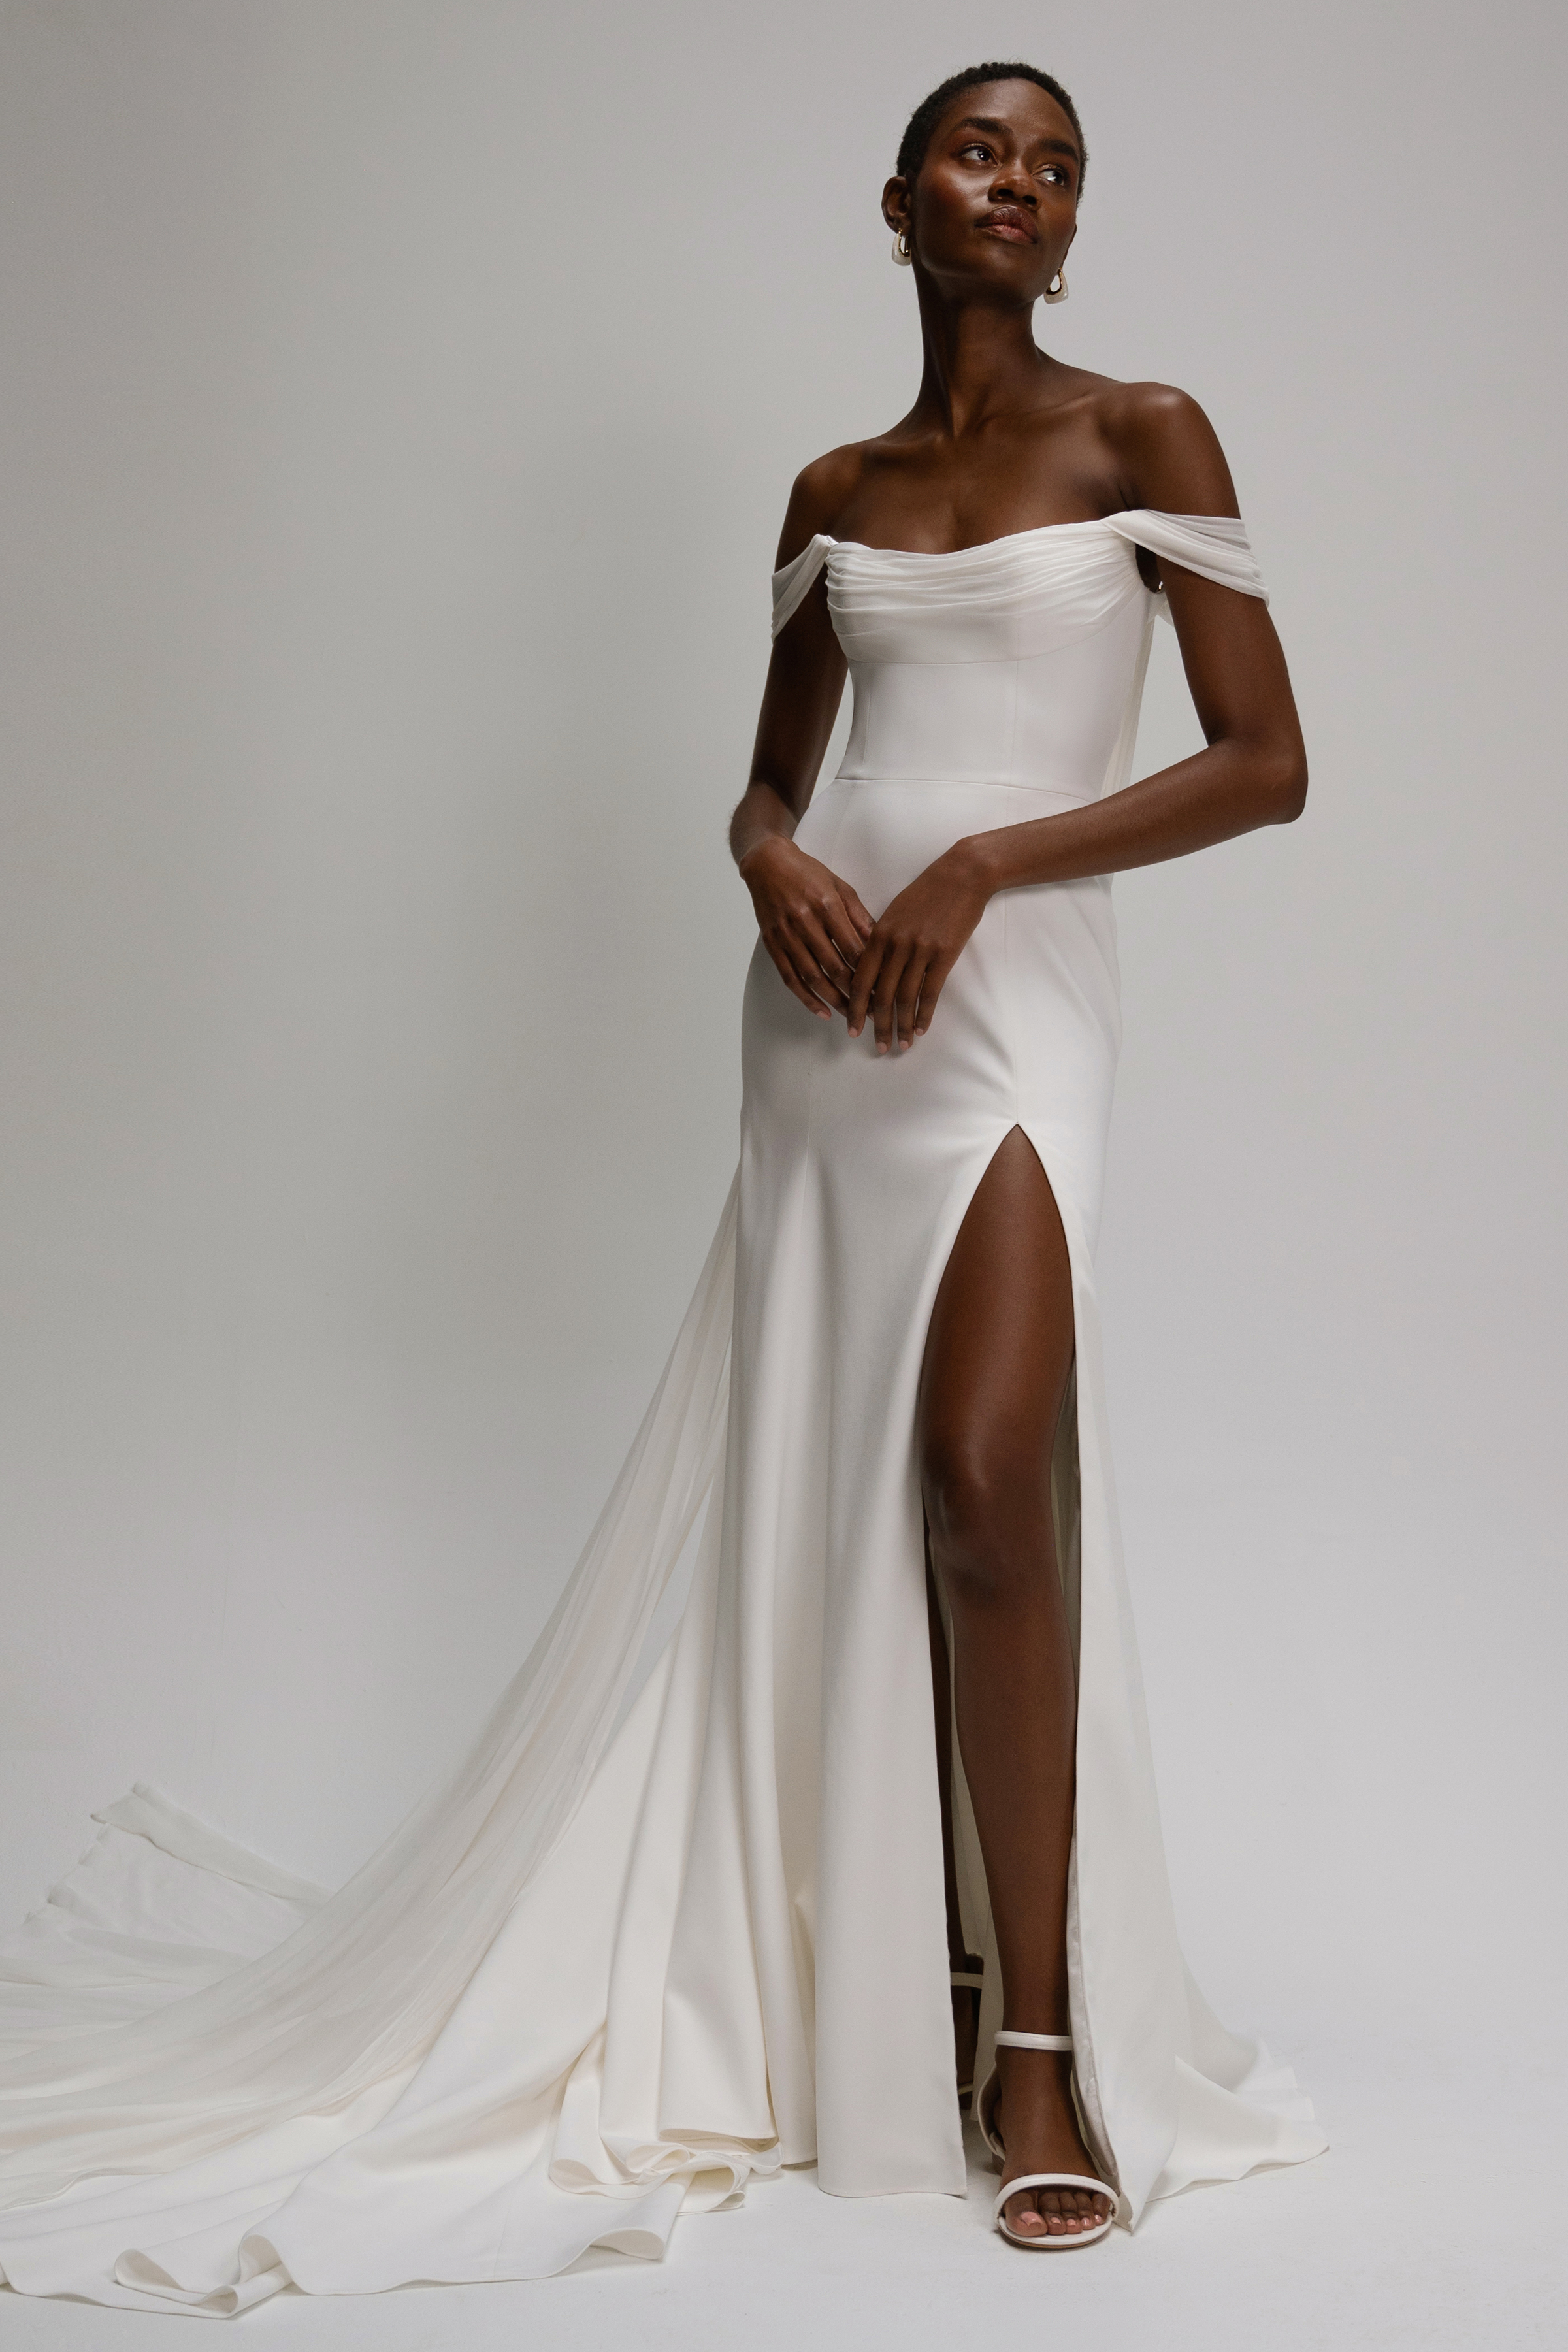 Romantic Strapless Short Wedding Dress Short A Line with Delicate